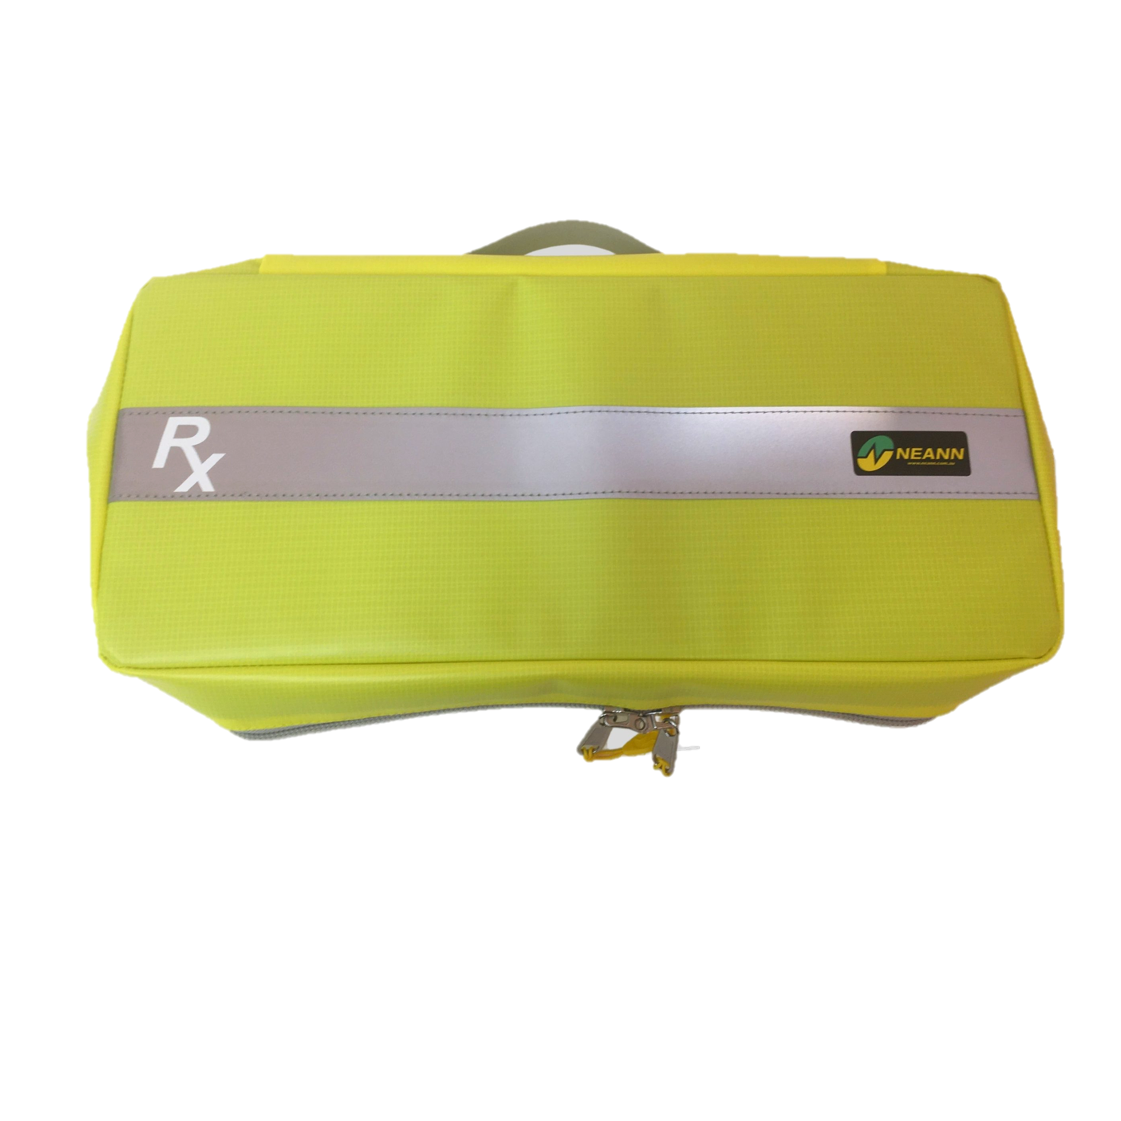 Neann Intensive Care Drug Bag Only - Yellow